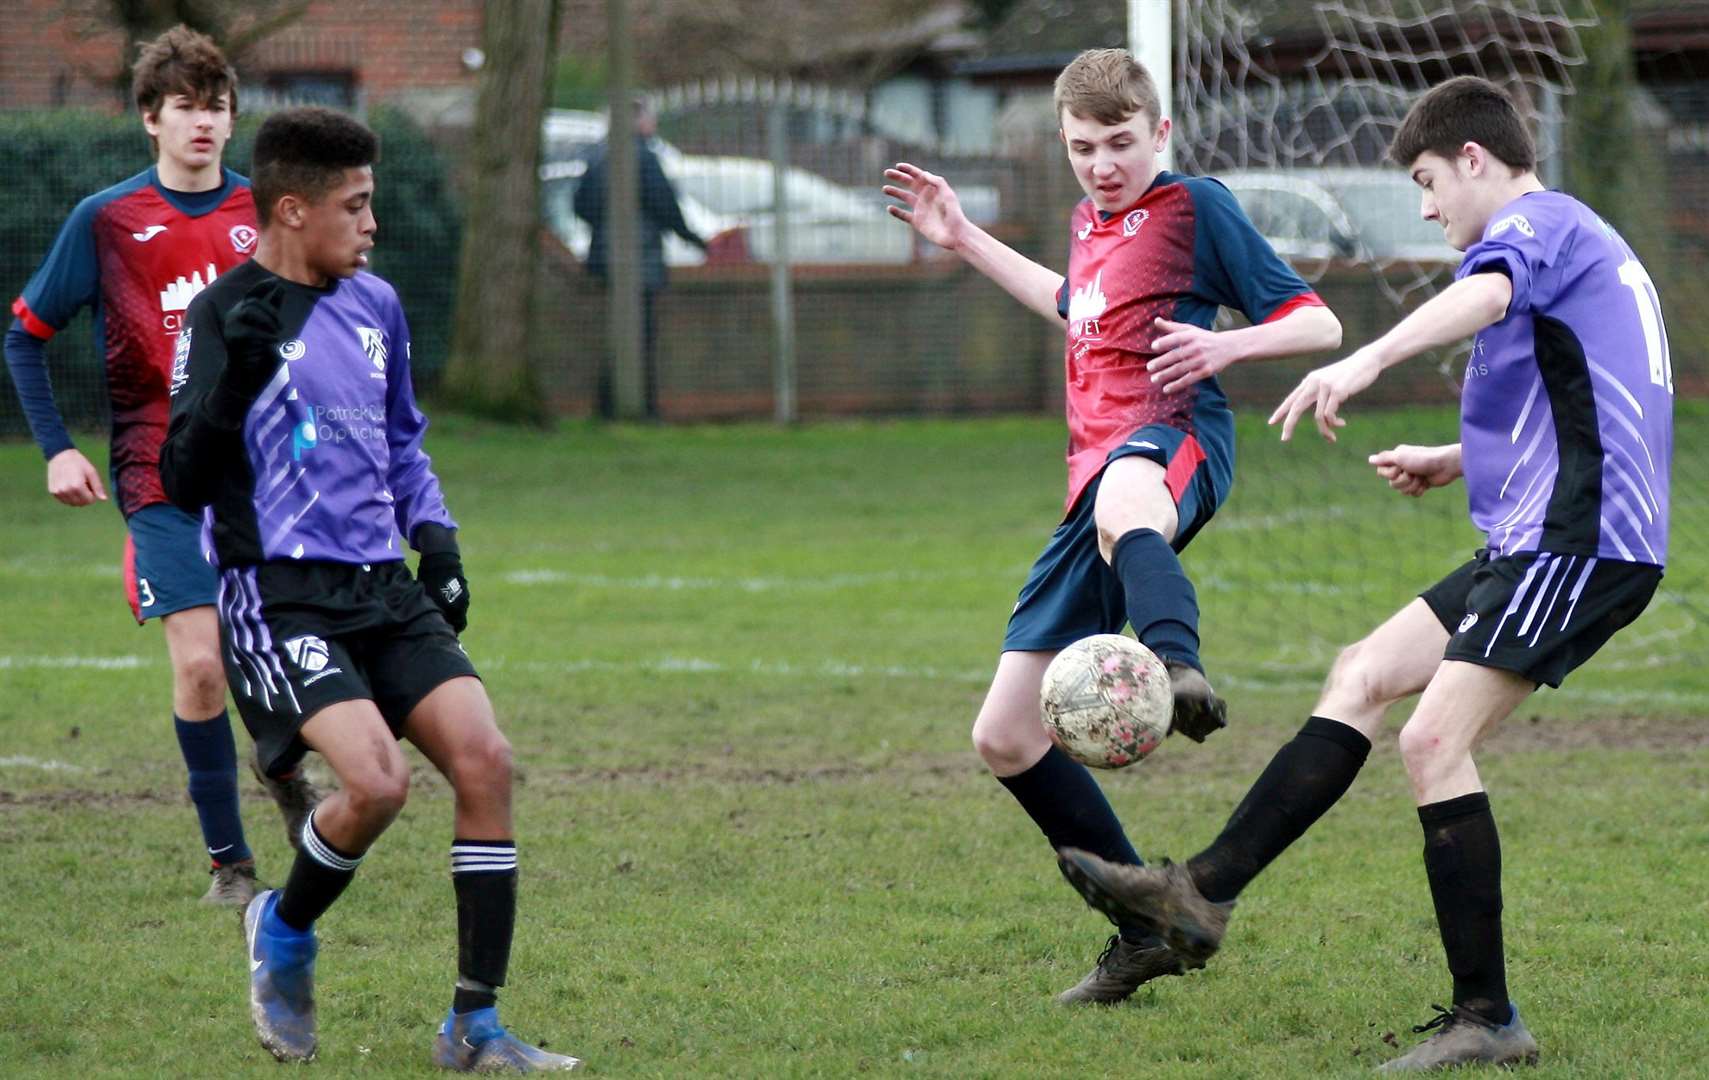 Hempstead Valley under-16s (red) put their foot in against Anchorians United under-16s on Sunday. Picture: Phil Lee FM28210079